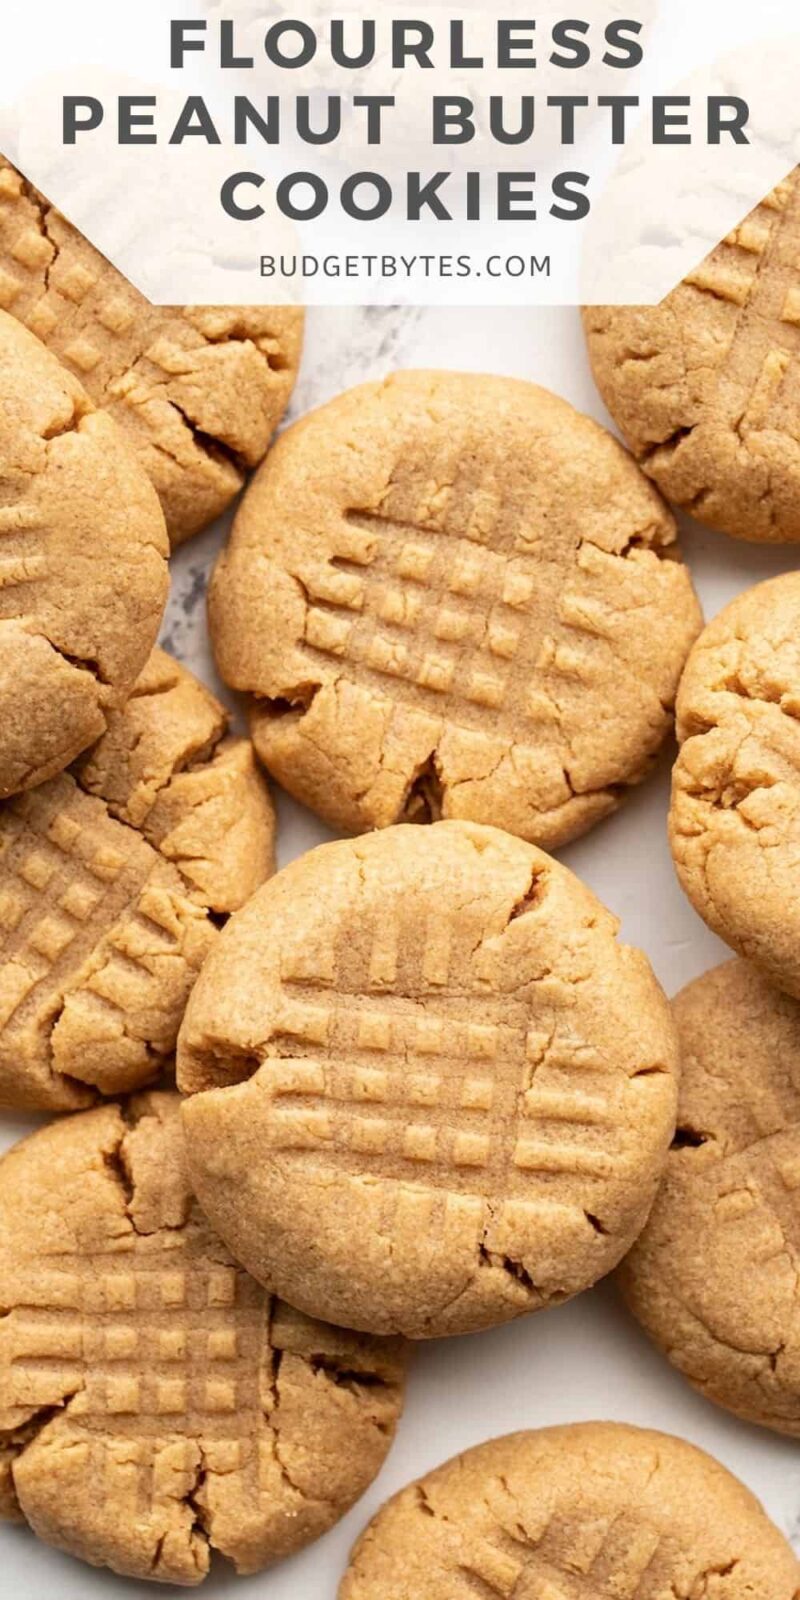 peanut butter cookies scattered on a surface, title text at the top.